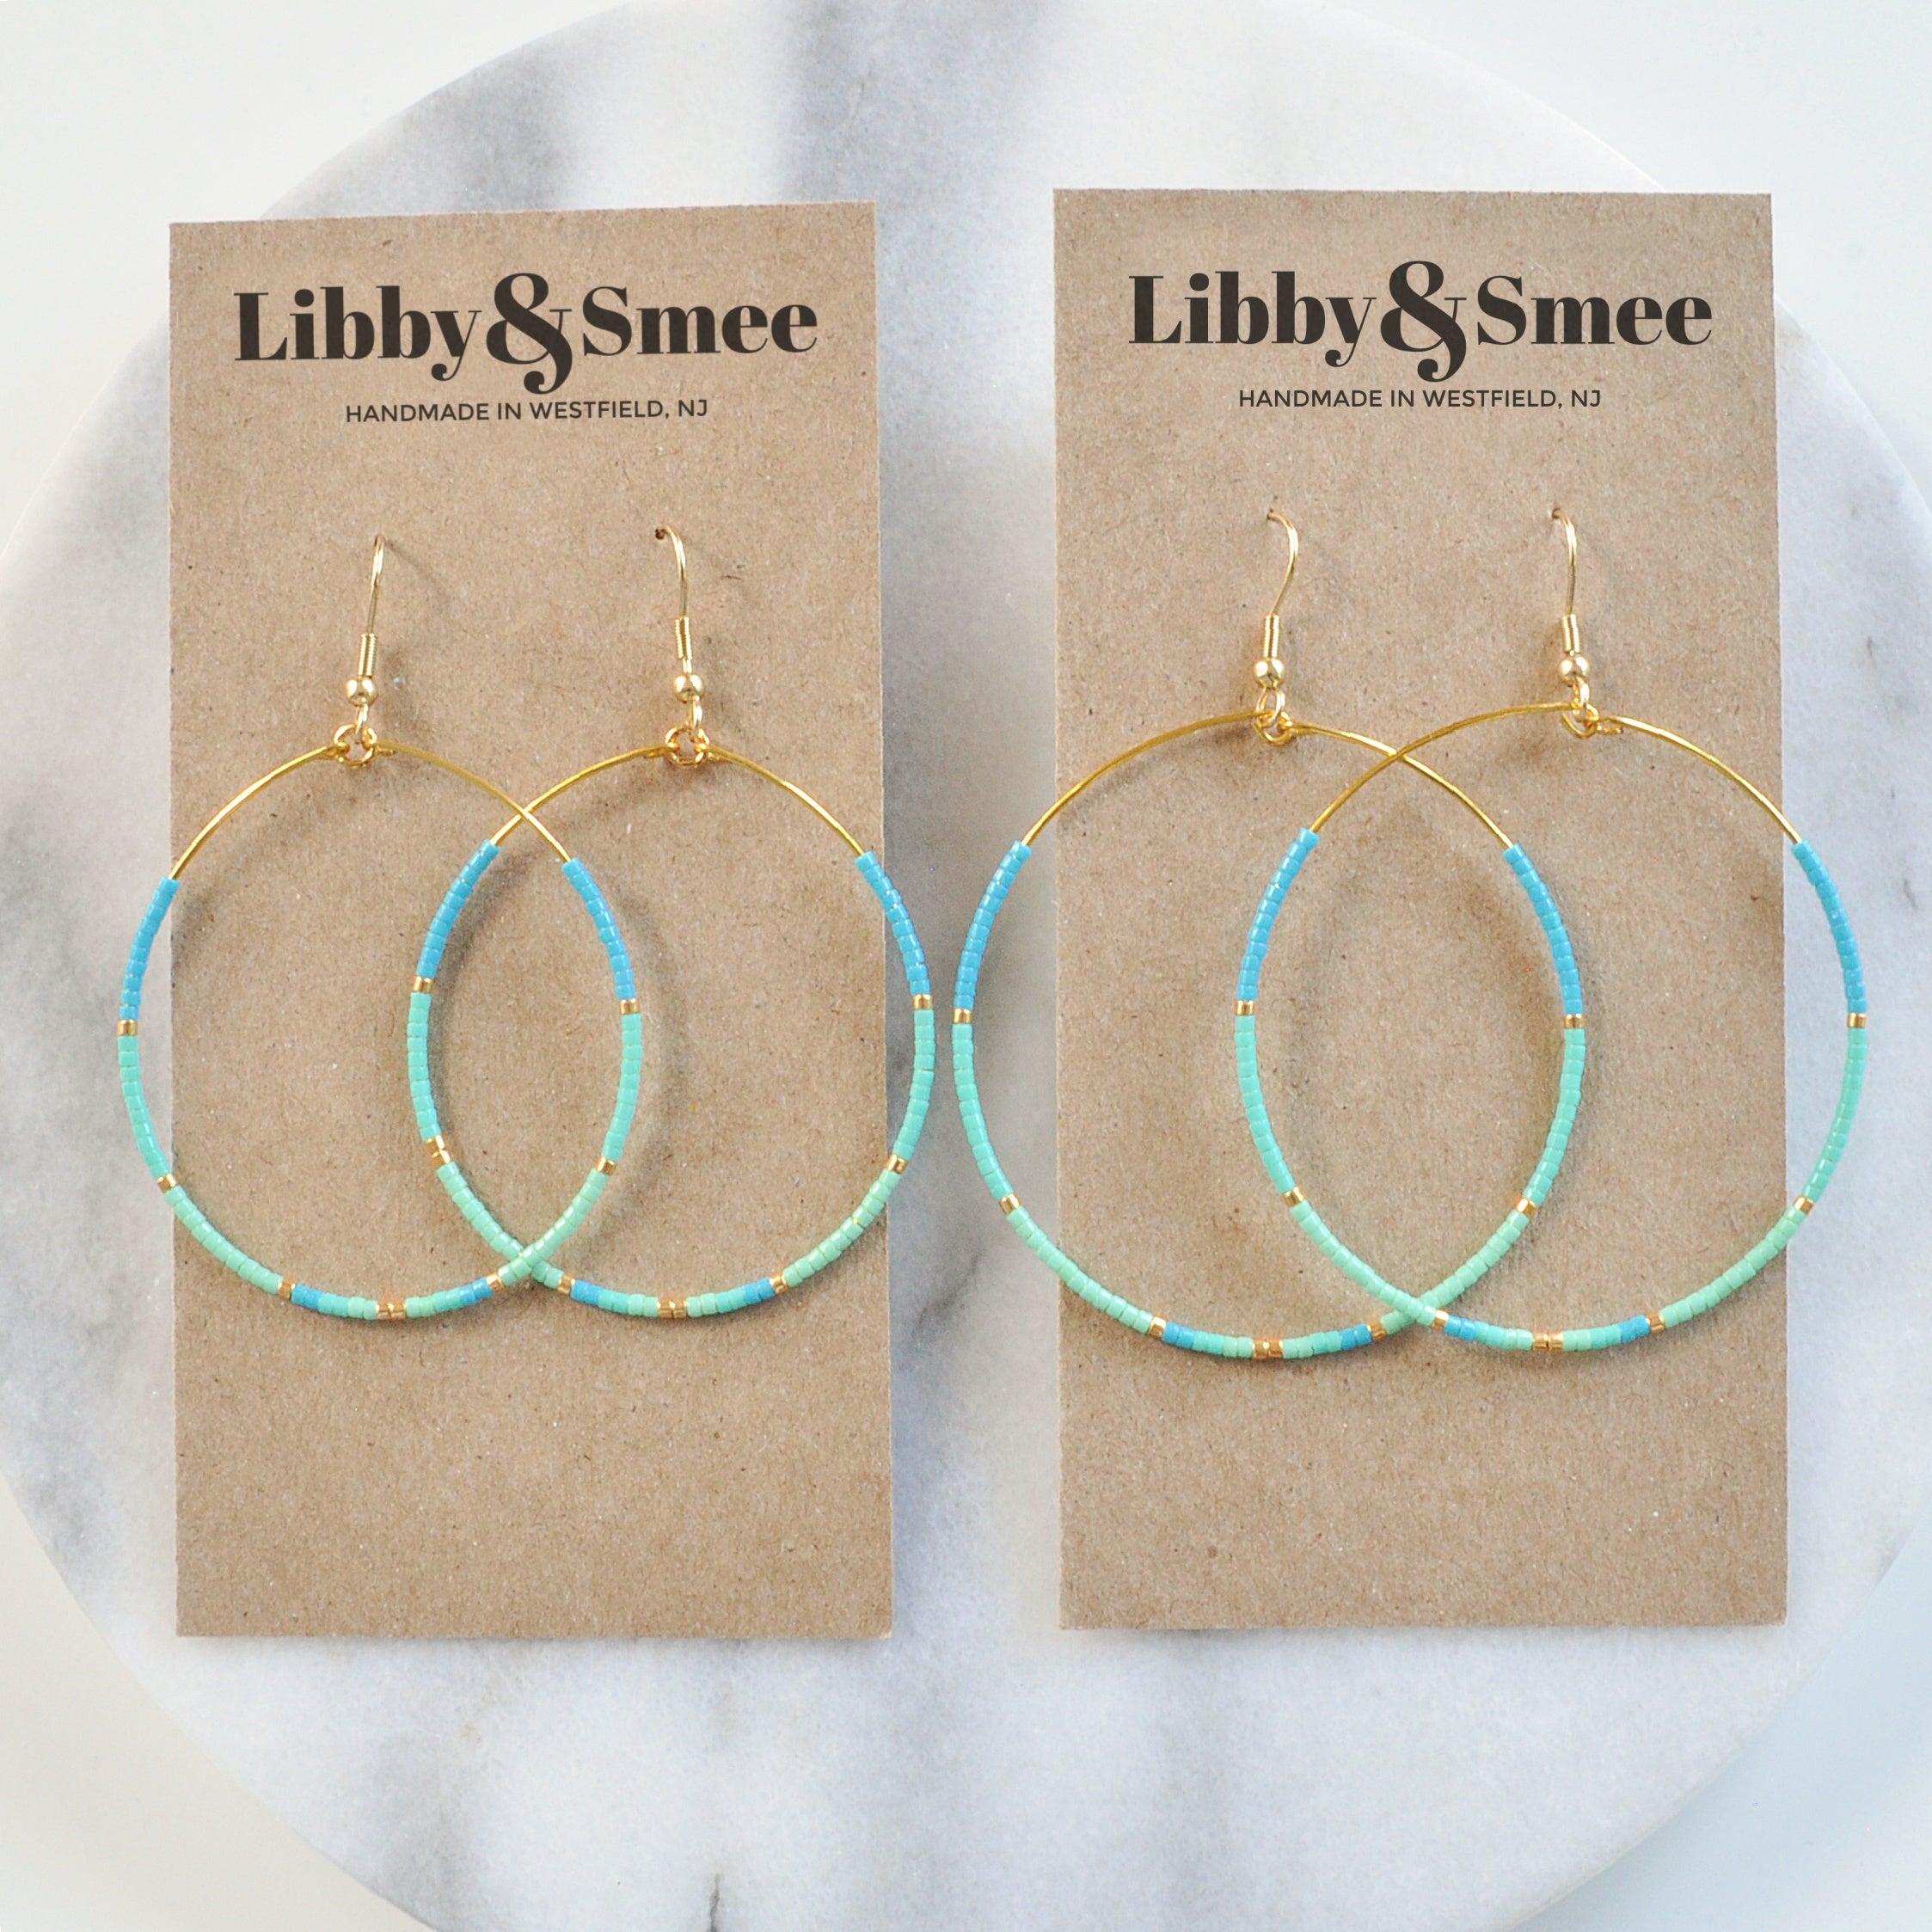 Libby & Smee Big Beaded Hoops in "Aruba" style with gold-plated ear wire and small seed beads in turquoise, aqua, mint and gold in size "big" teardrop shape and "bigger" circle shape shown on kraft earring cards with Libby & Smee Handmade in Westfield NJ logo  - still life